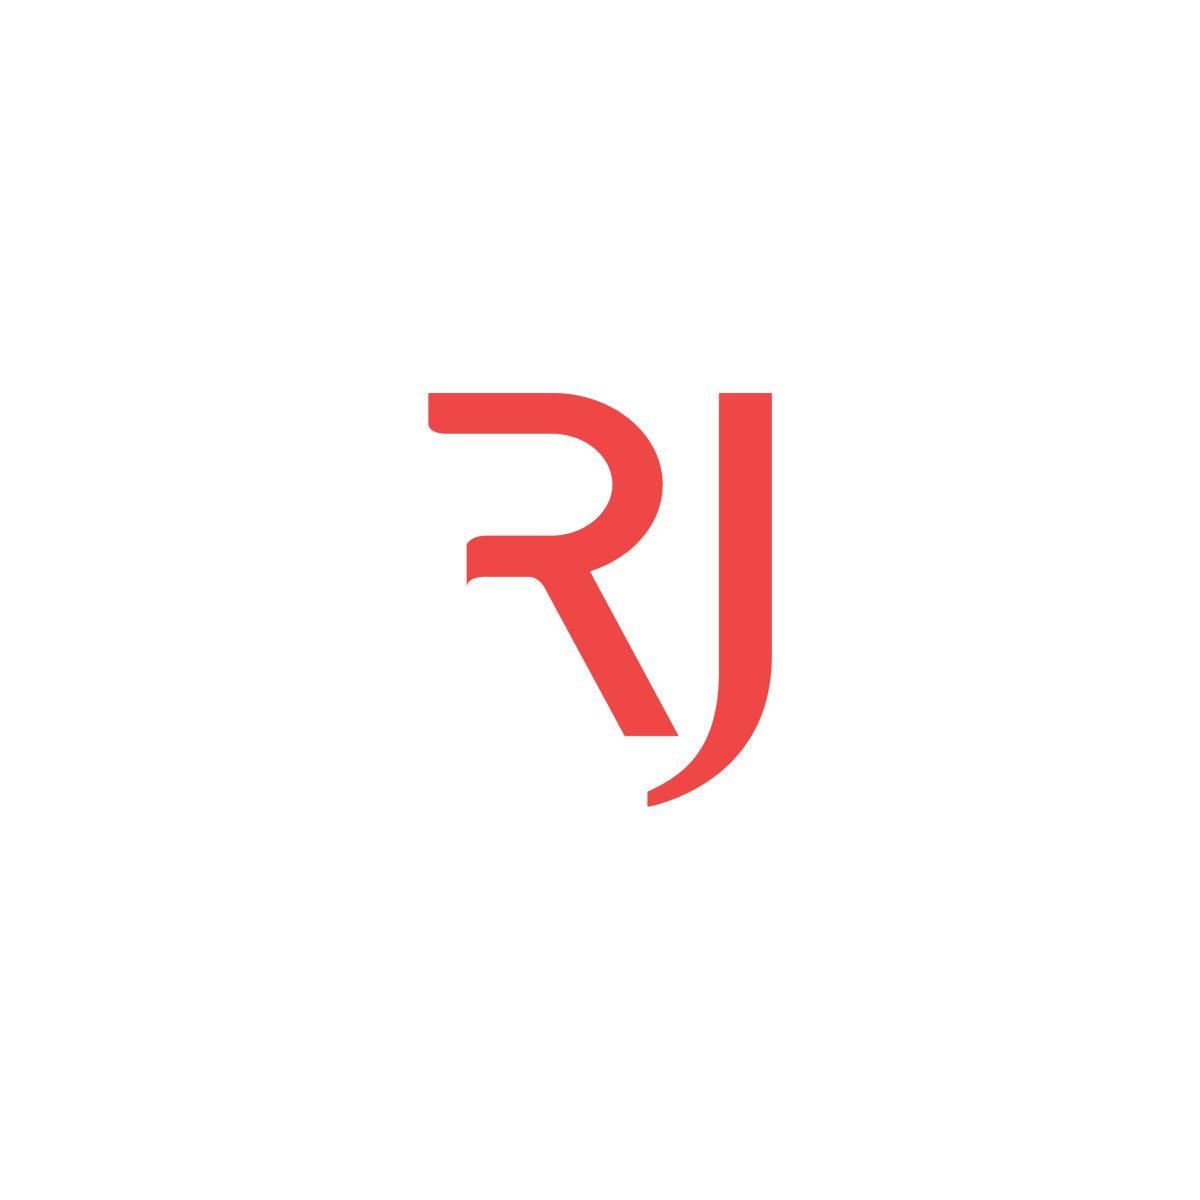 RJ Logo - RJ Watches / RJWATCHES.com / RJ Watches / RJWATCHES.com